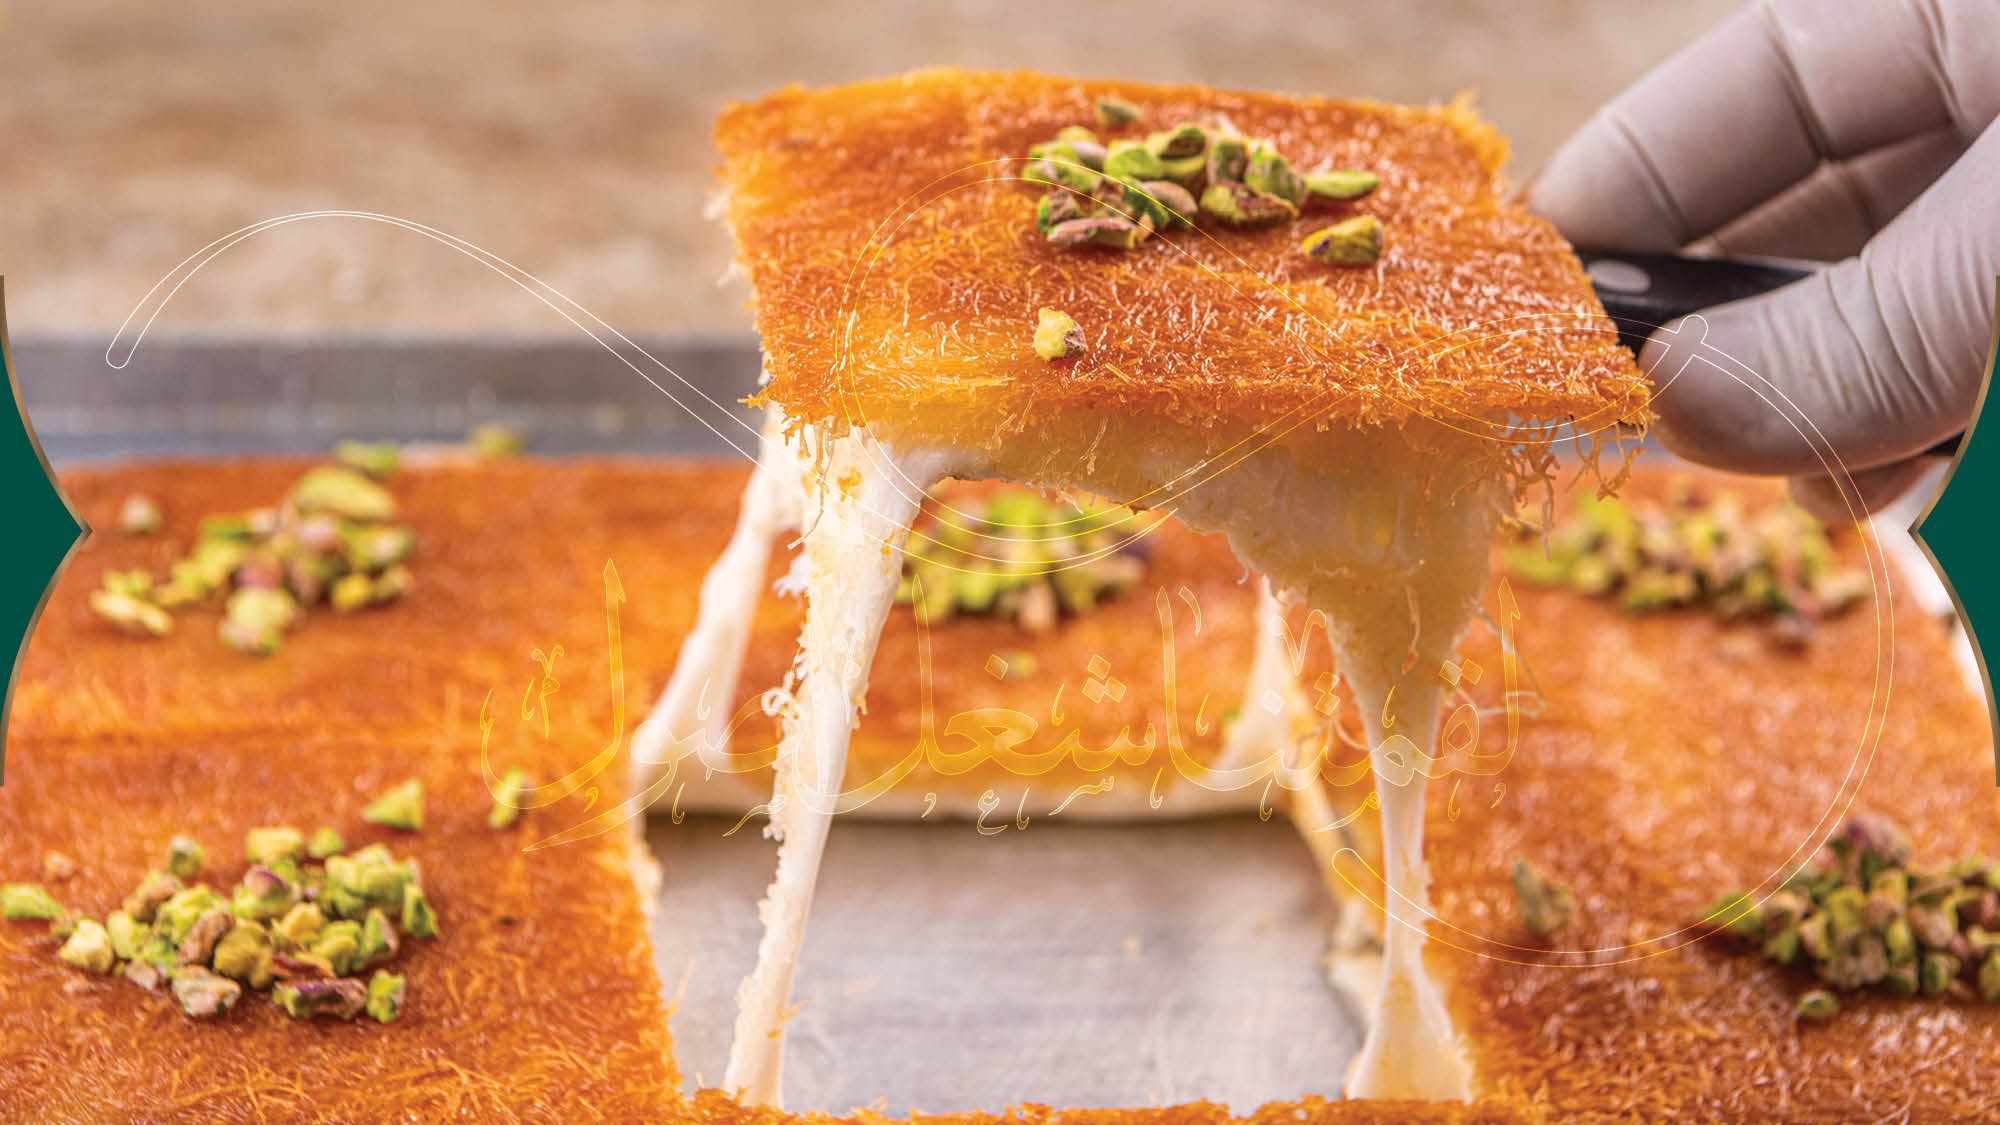 Buy Delicious Sweets Today: The Best Premium Arabic Sweets in Dubai, Al Barsha